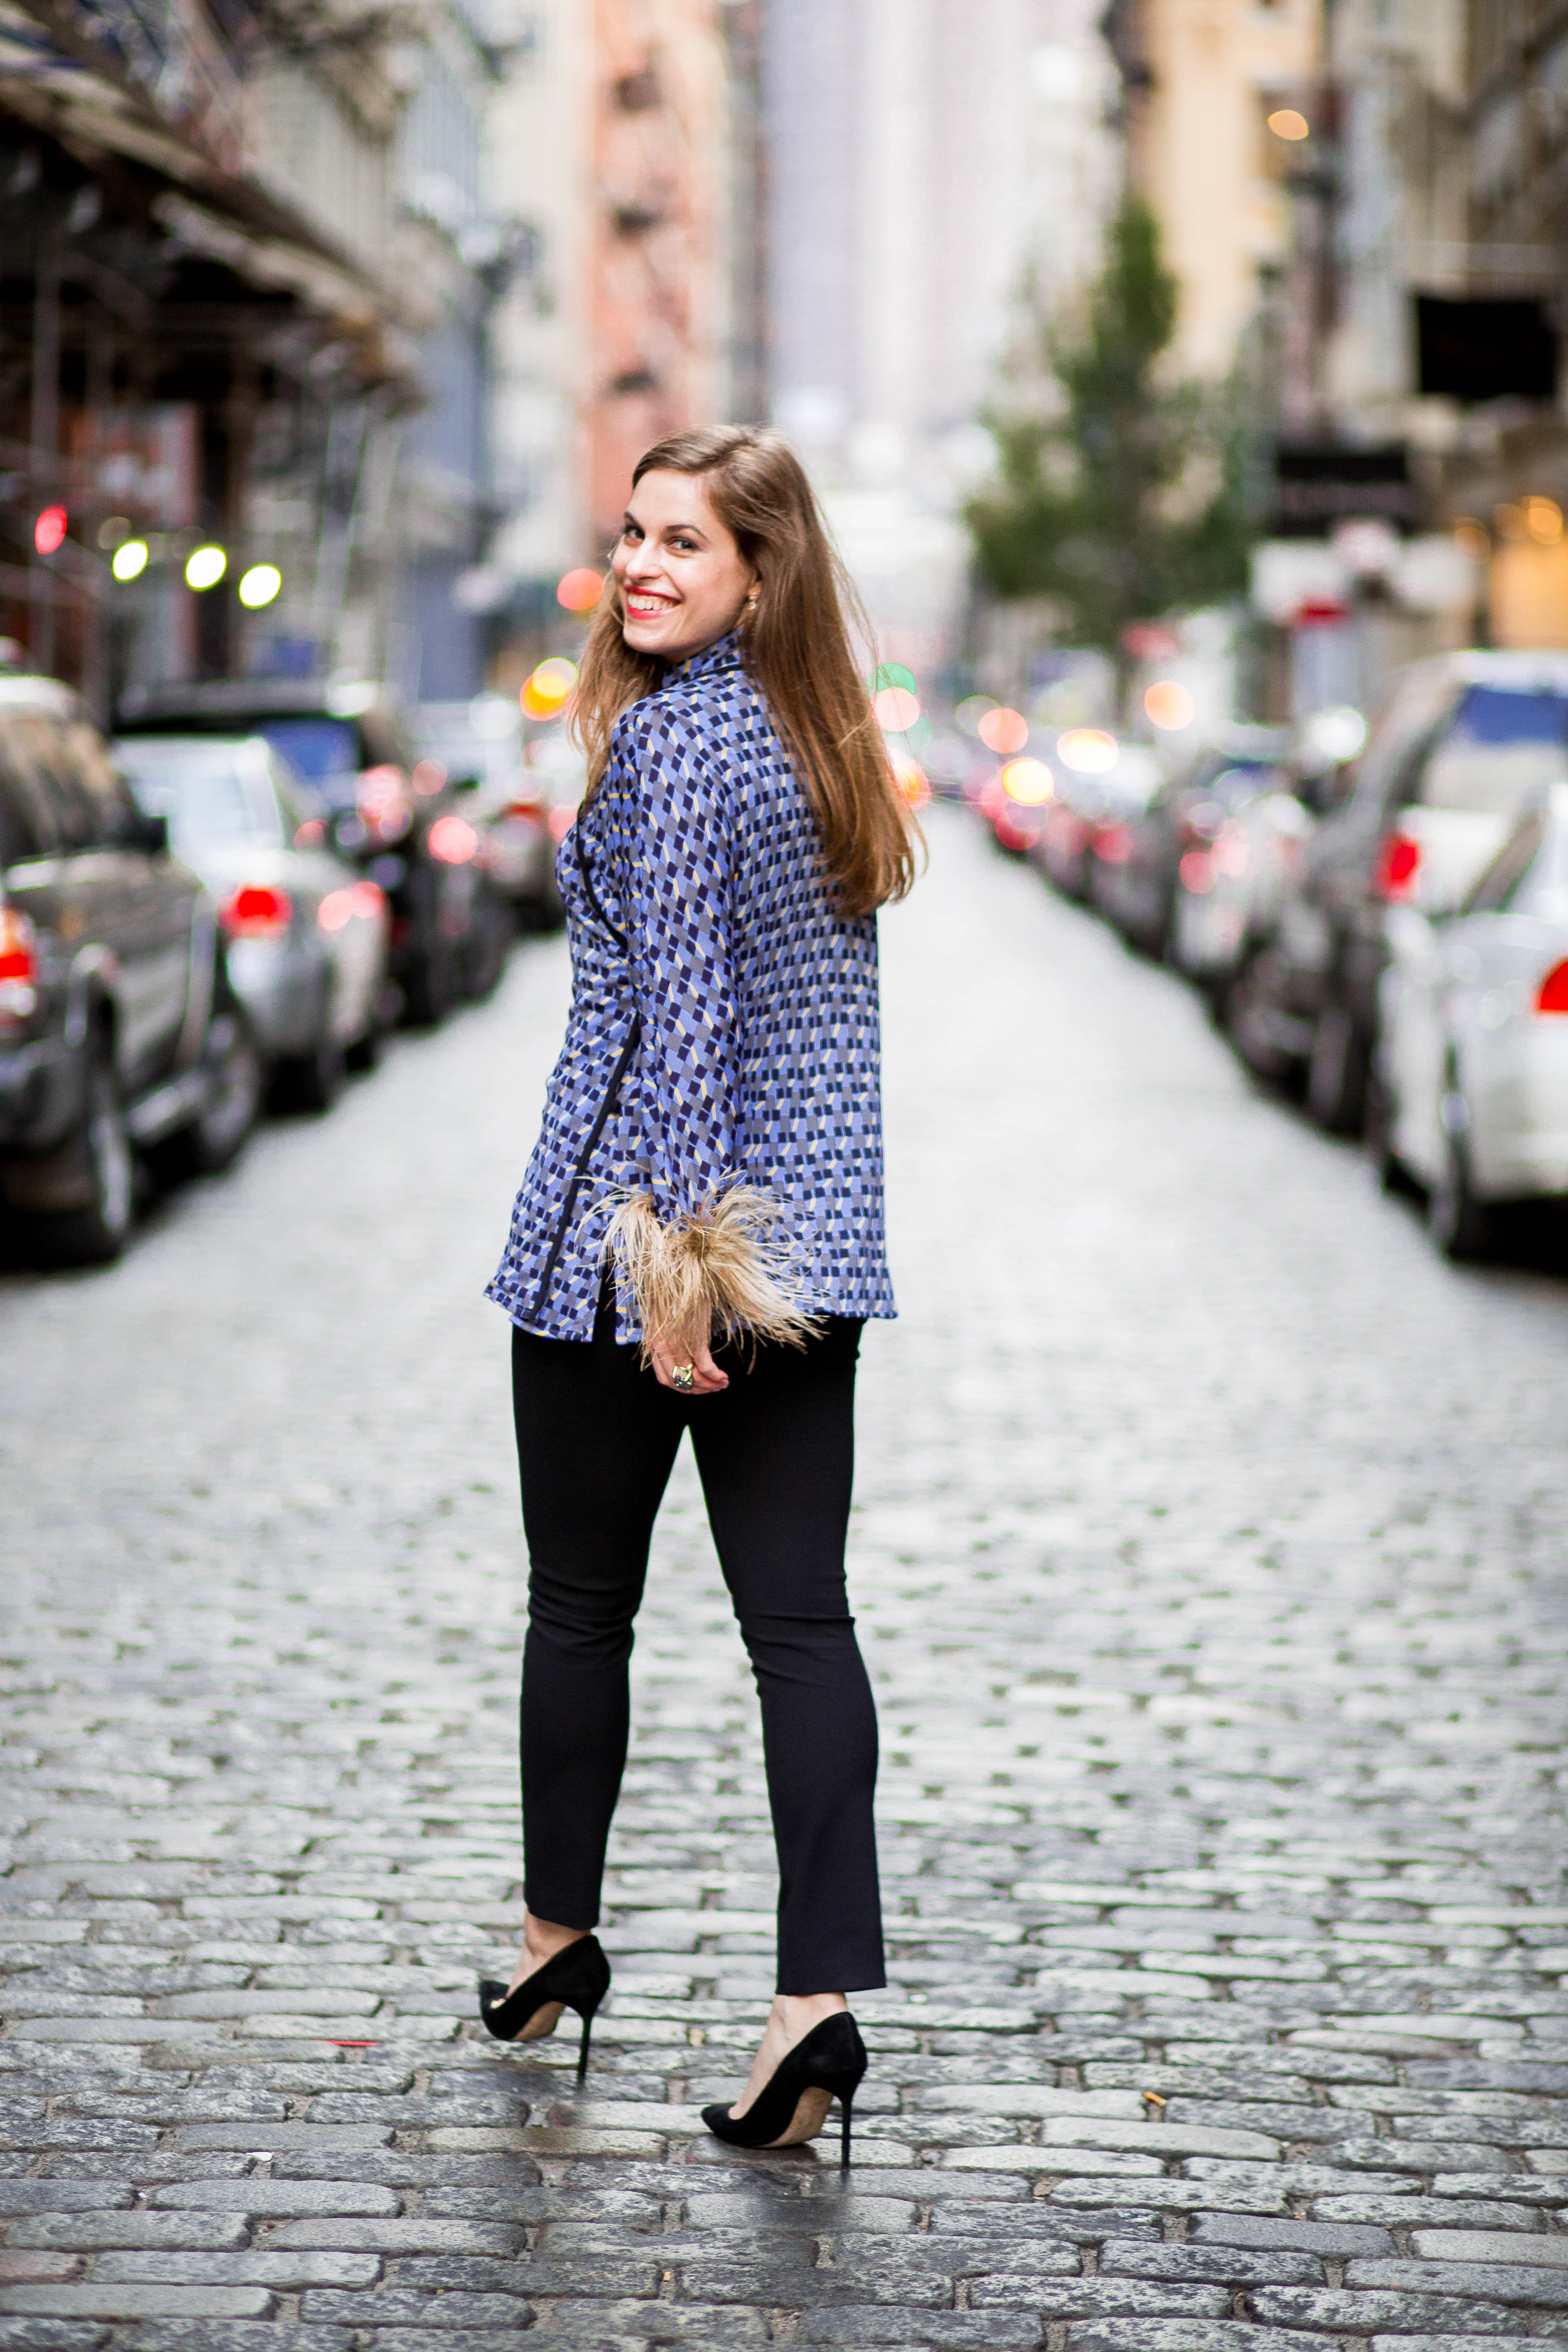 Woman walking down the street in Manhattan away from the camera, but she has turned around: she is smiling, has brown hair, wears a blue, black and white top with feathers on the sleeves, black pants and black pumps